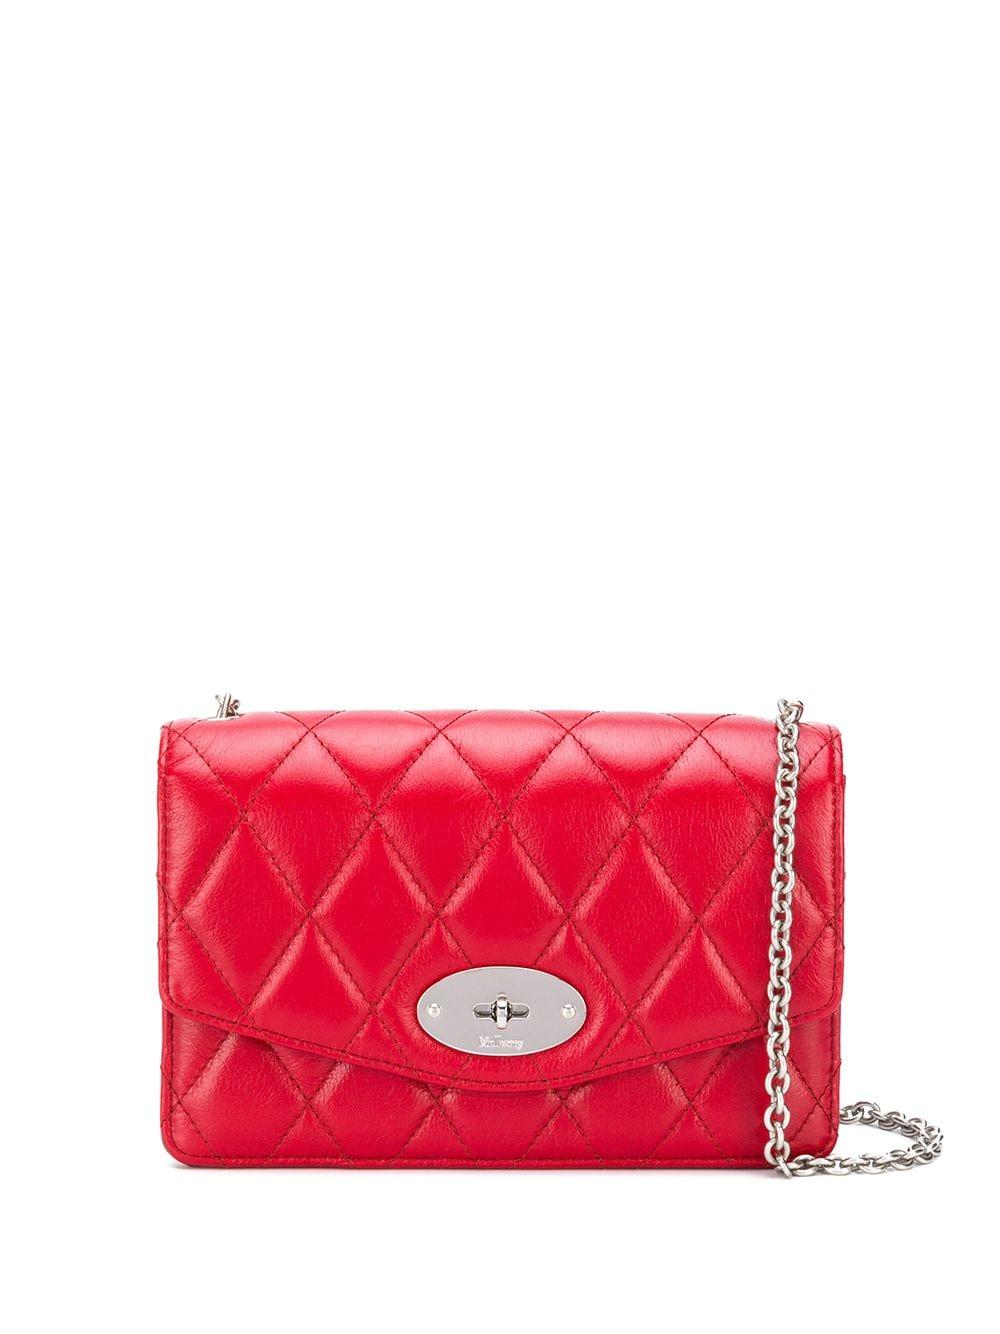 Mulberry Leather Darley Quilted Small Shoulder Bag in Red | Lyst